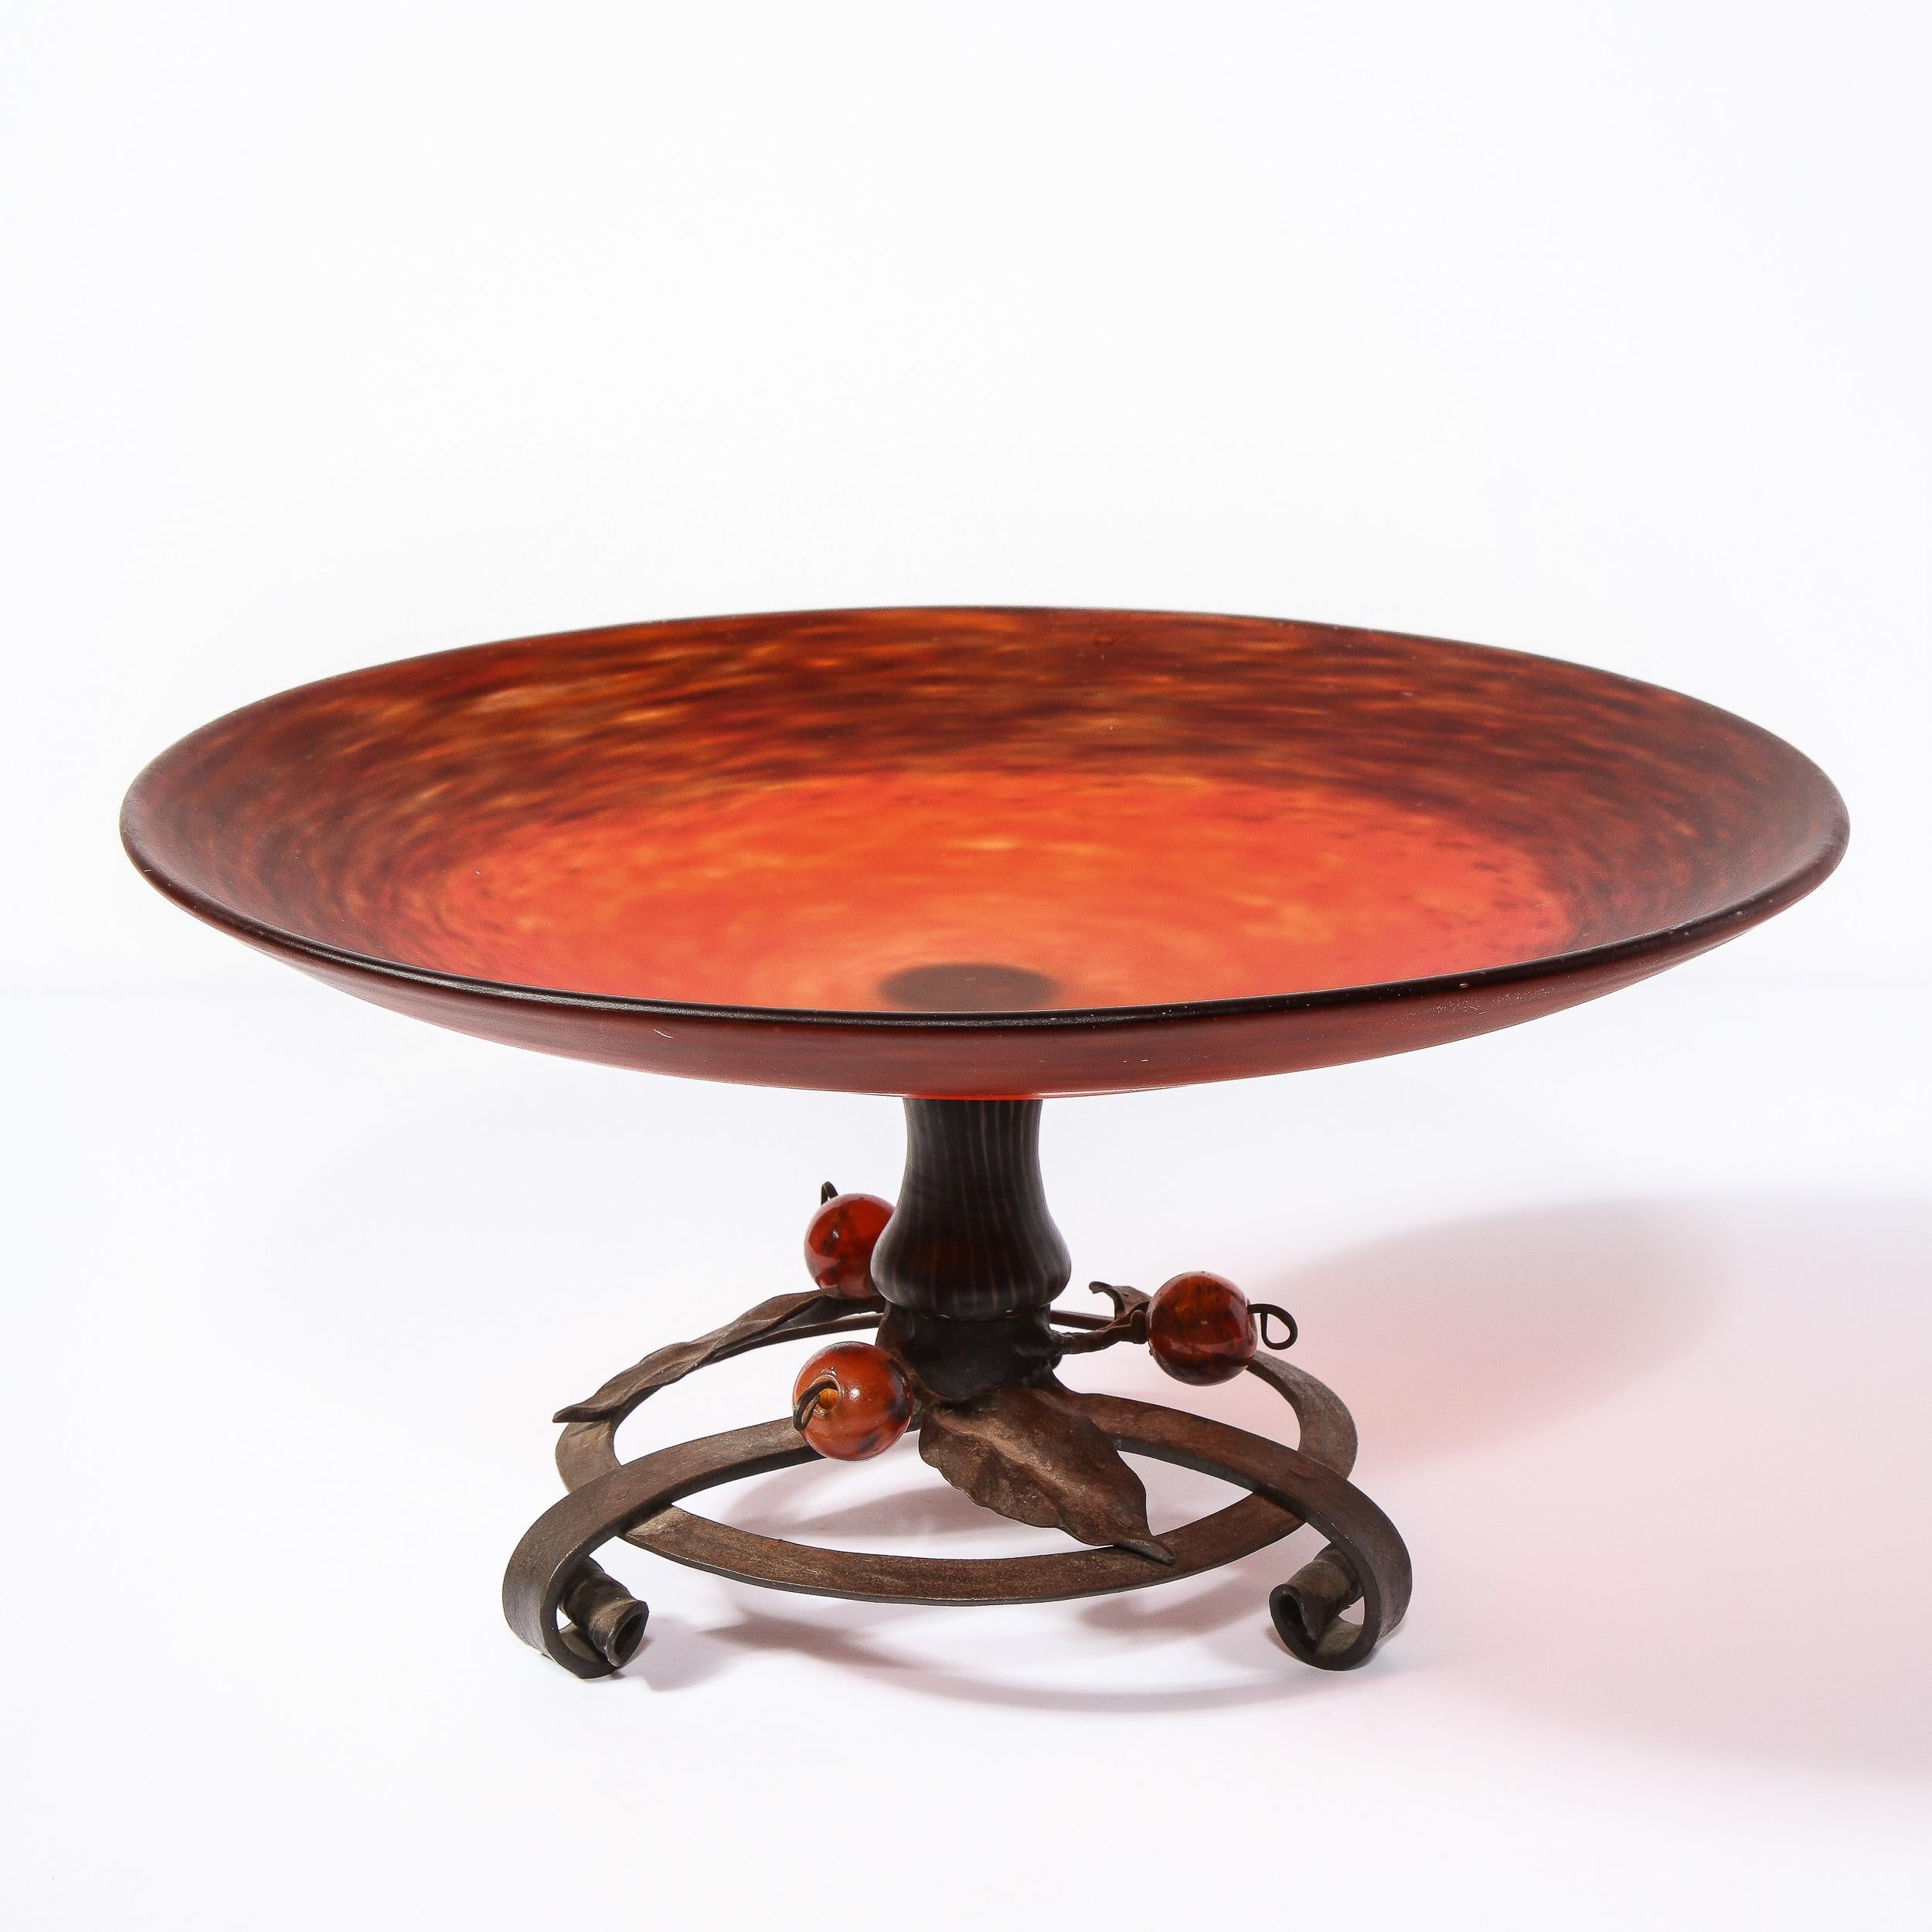 This sophisticated Art Deco centerbowl was realized and signed by Charles Schneider in France circa 1920. It features a mottled carnelian glass top with a wrought iron base adorned with ruby spherical embellishments and stylized foliate detailing.